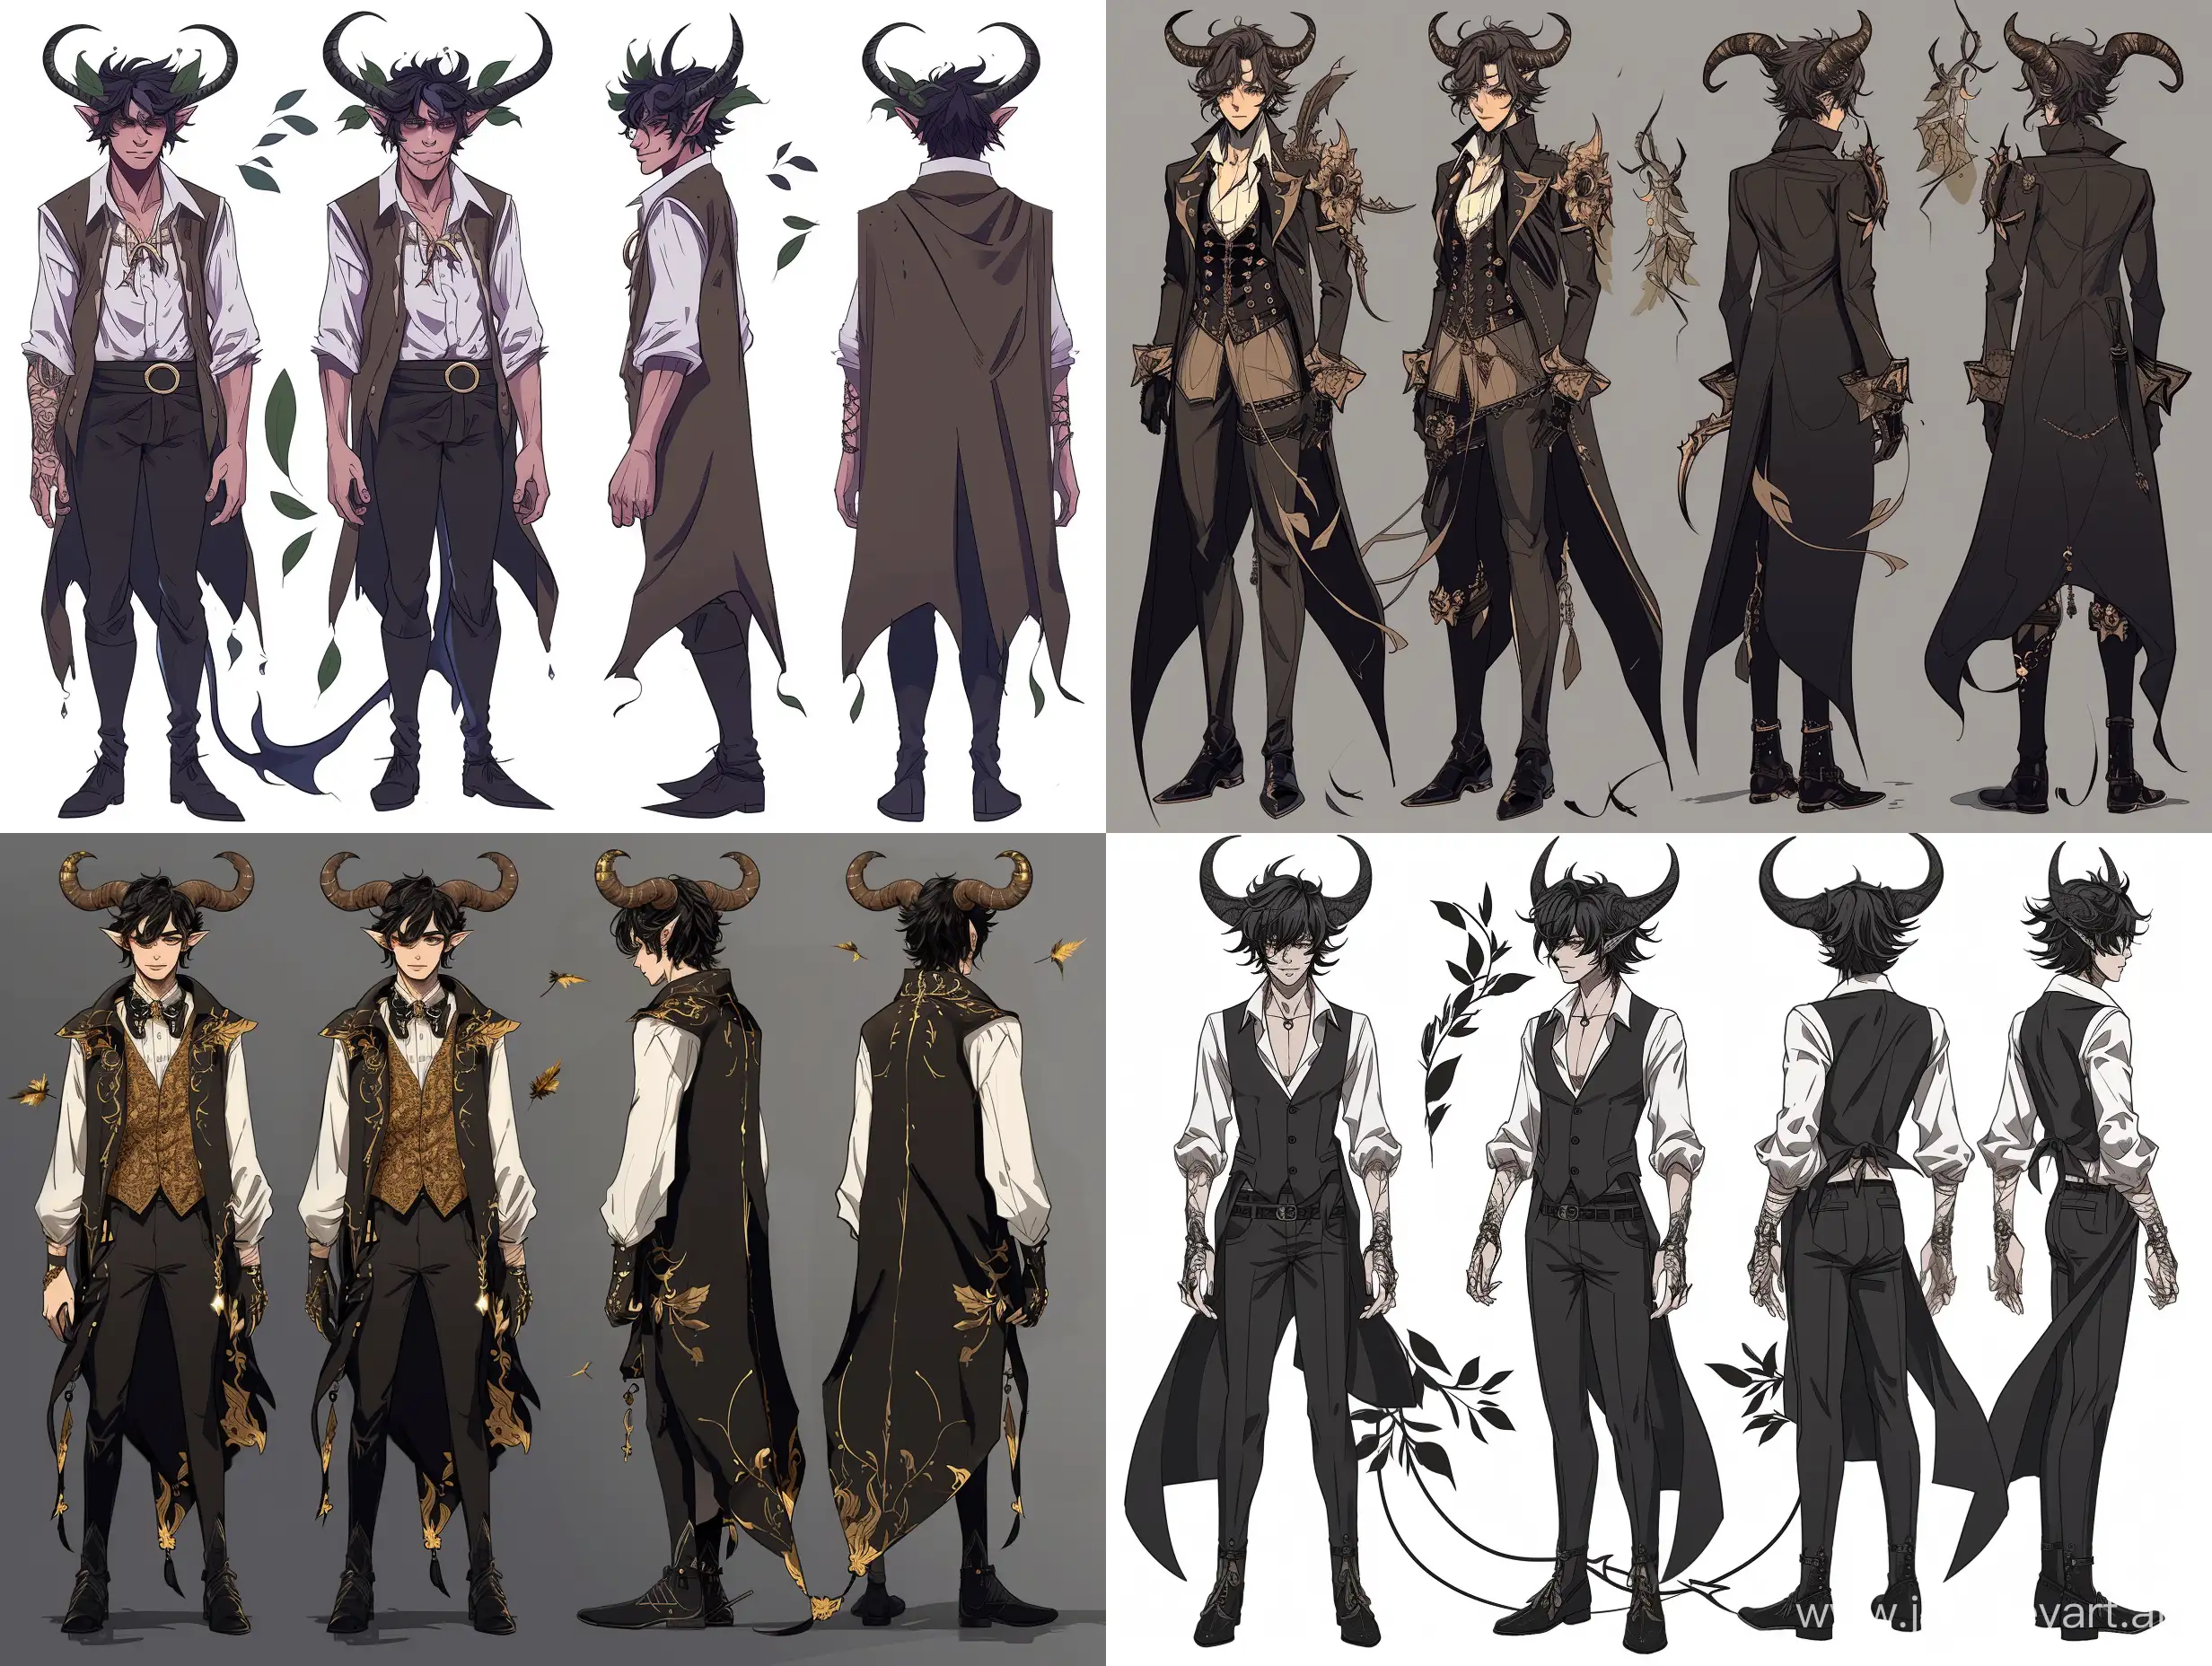 Enigmatic-Anime-Character-with-Horns-in-Intricate-Attire-and-Magical-Aura